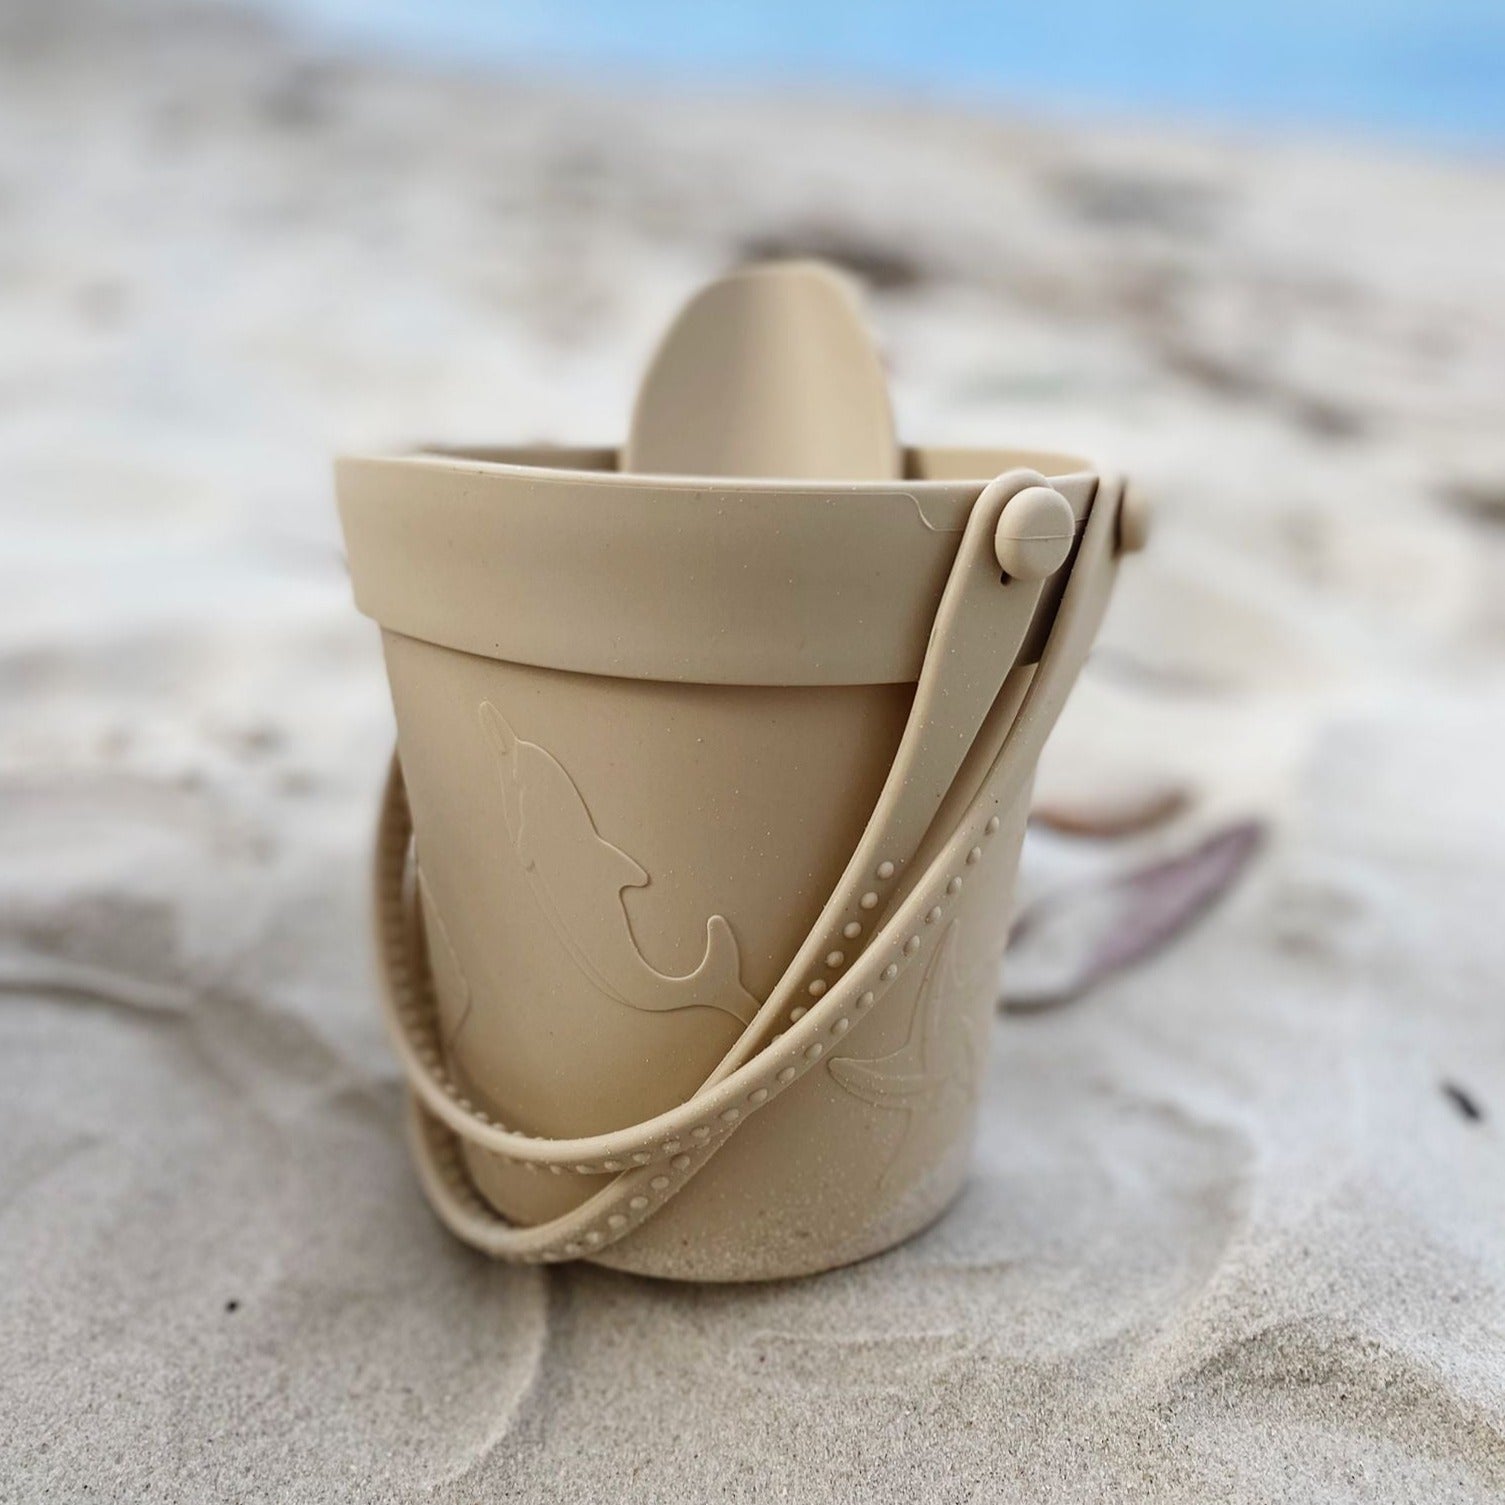 Sand Silicone Beach Bucket from the Silicone Beach Set is pictured on the sandy shore, demonstrating the durable and easy-to-clean nature of the beach toys in a real-life beach setting with natural seaside elements in the backdrop